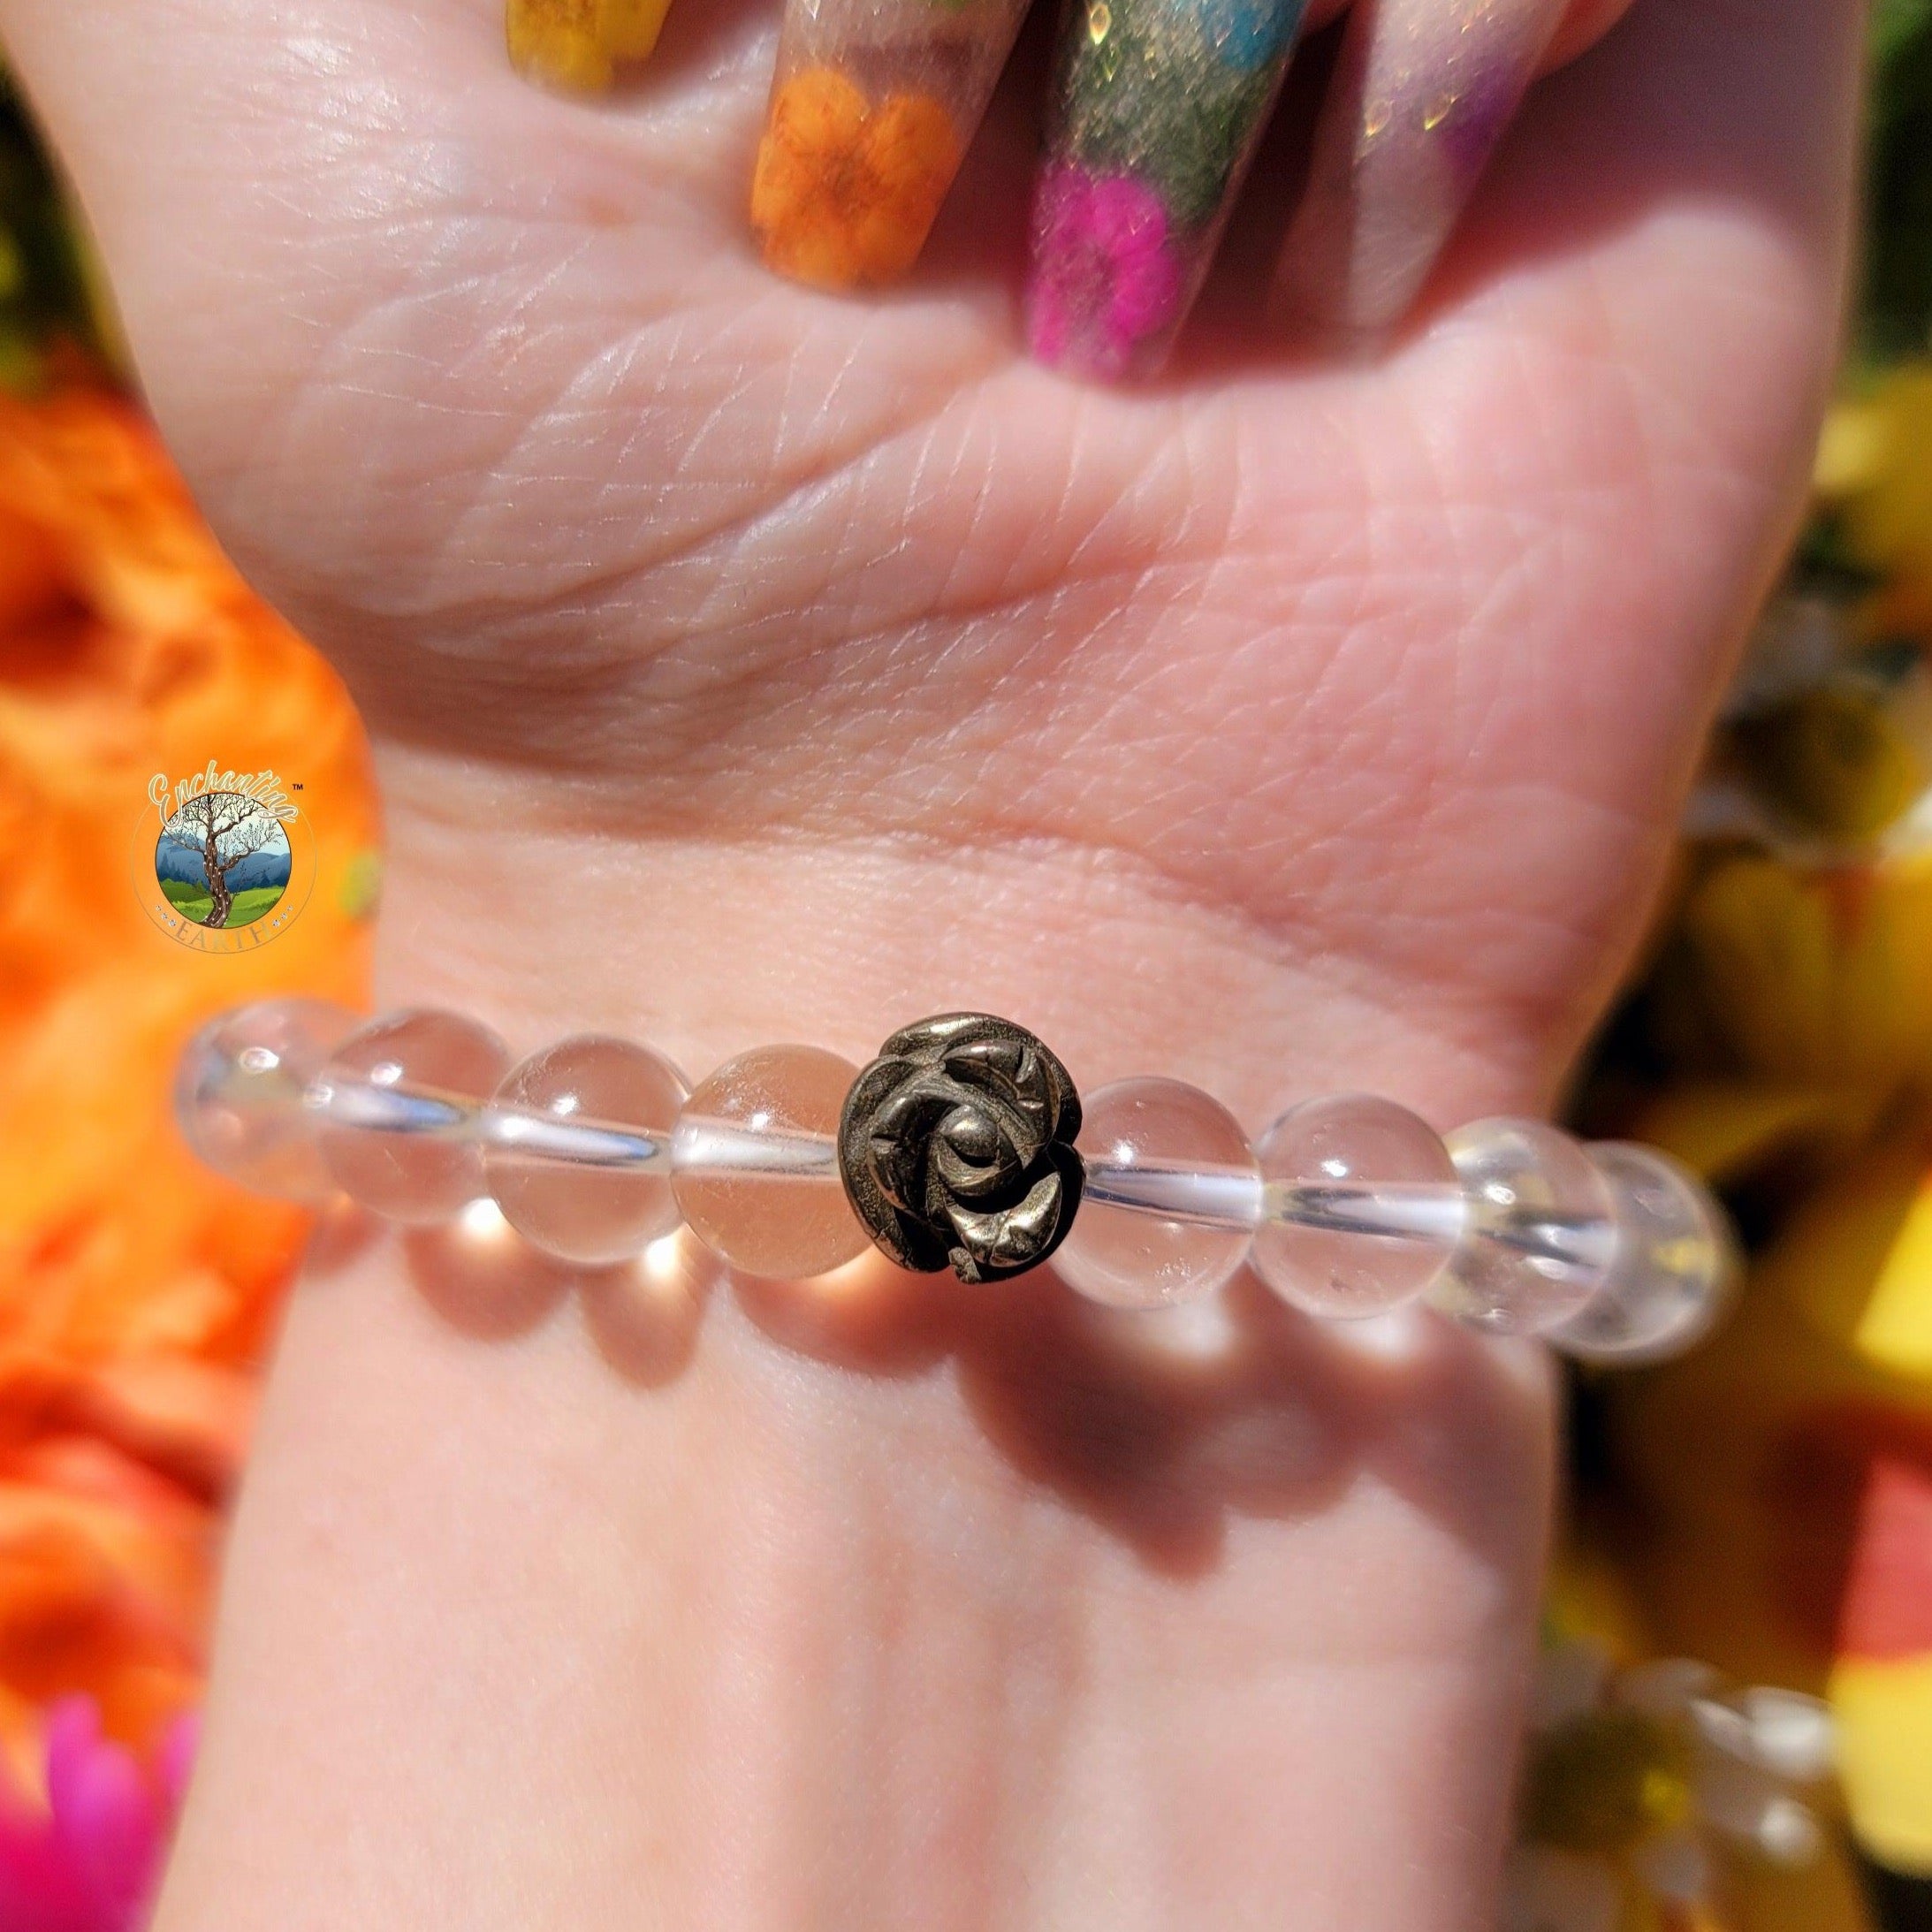 Enchantress Intention Bracelets to Support you on your Path